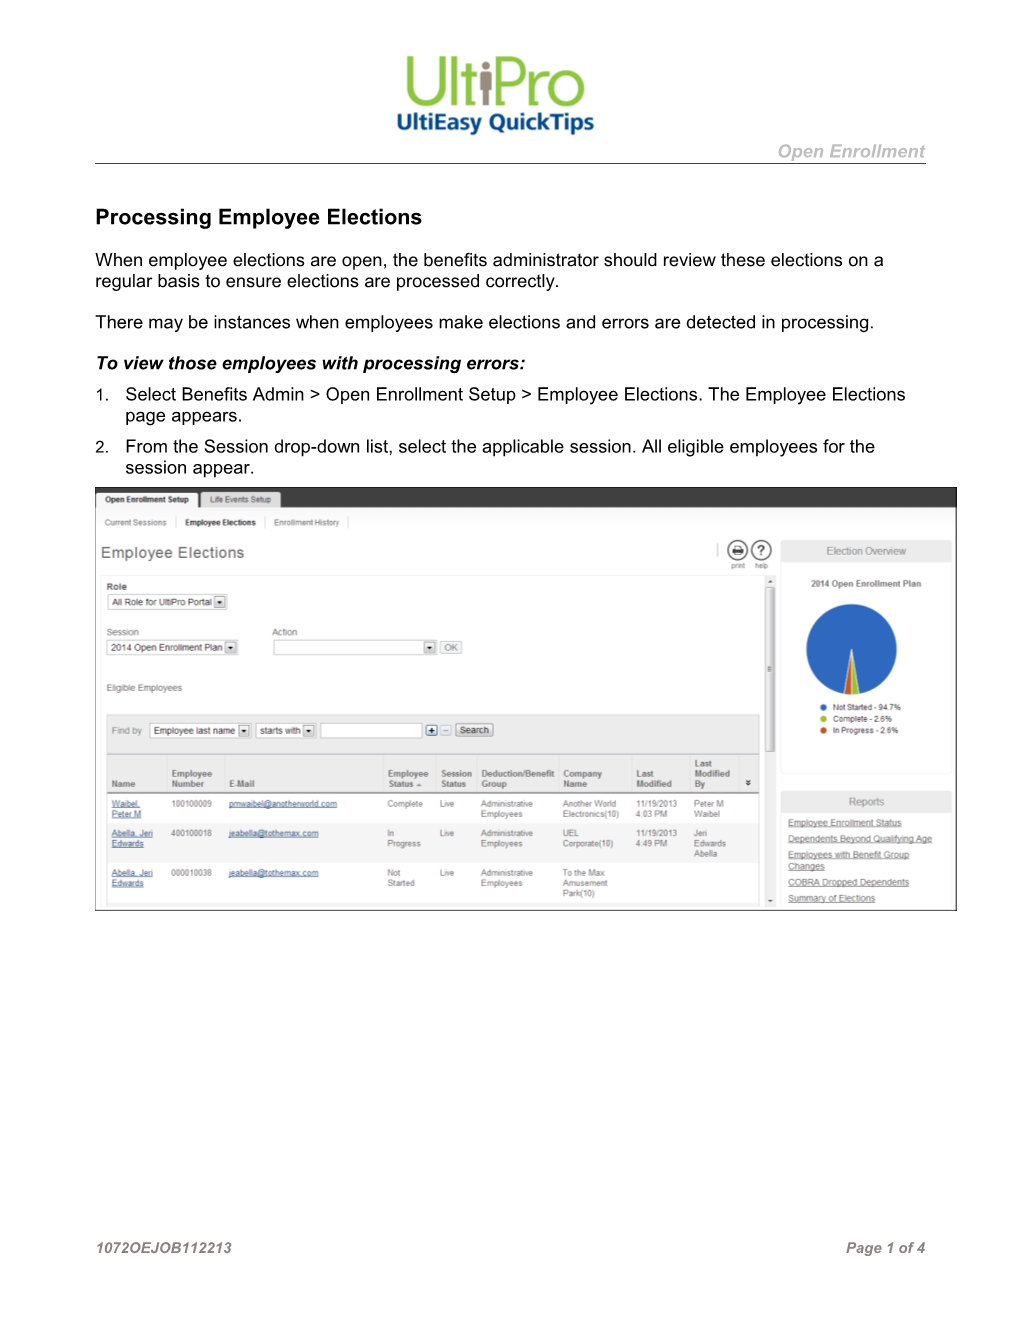 Processing Employee Elections